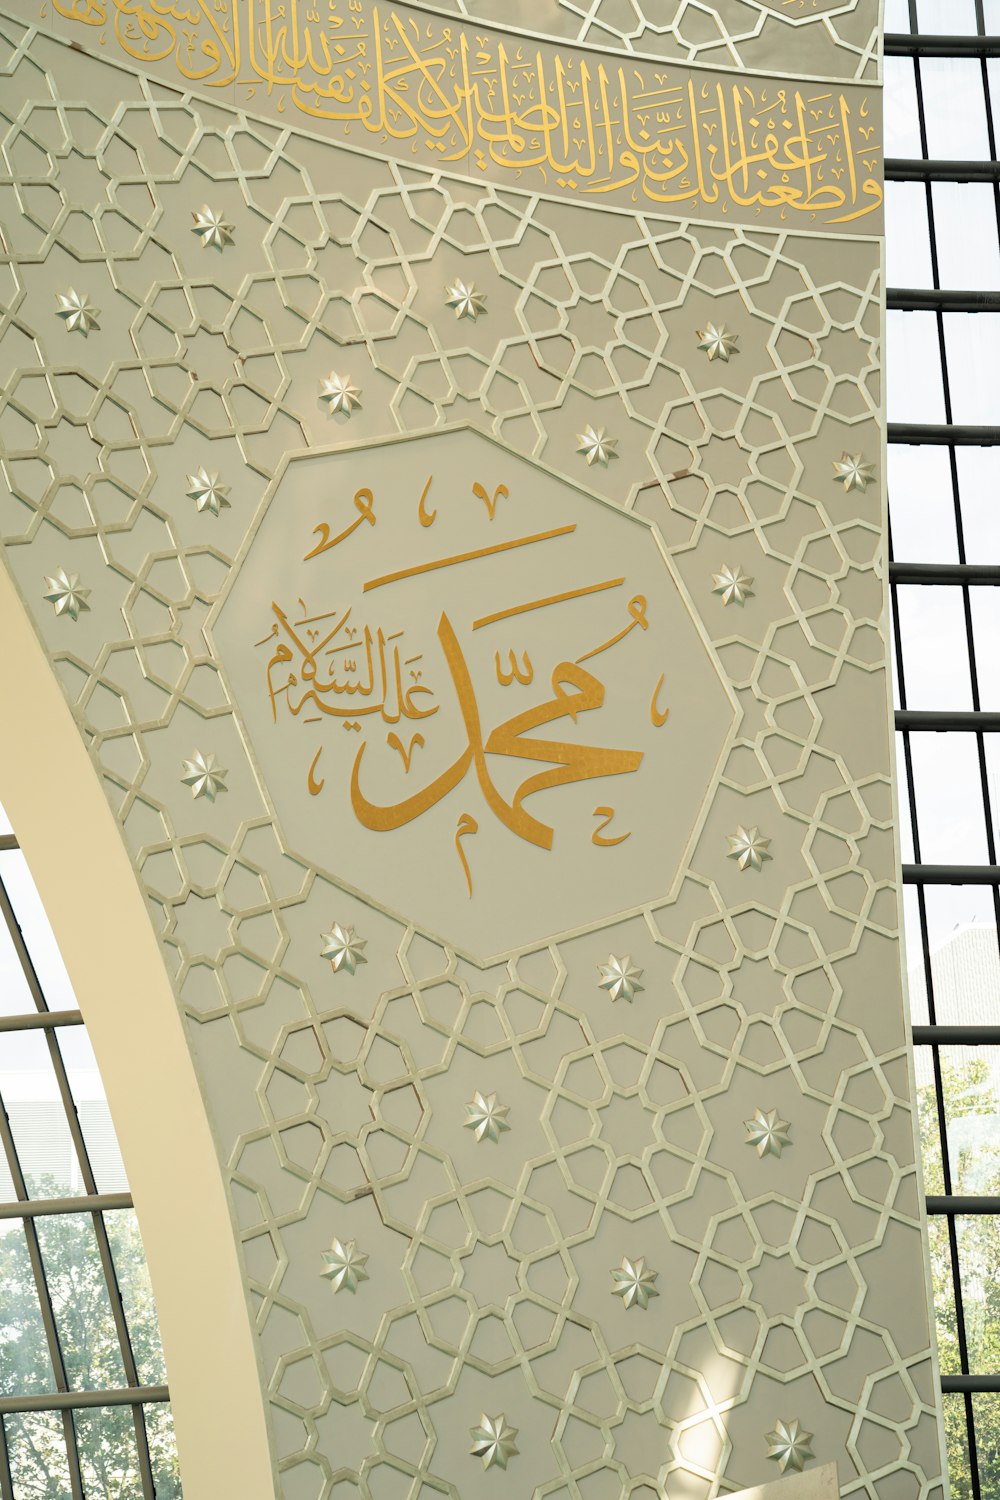 a large white building with arabic writing on it